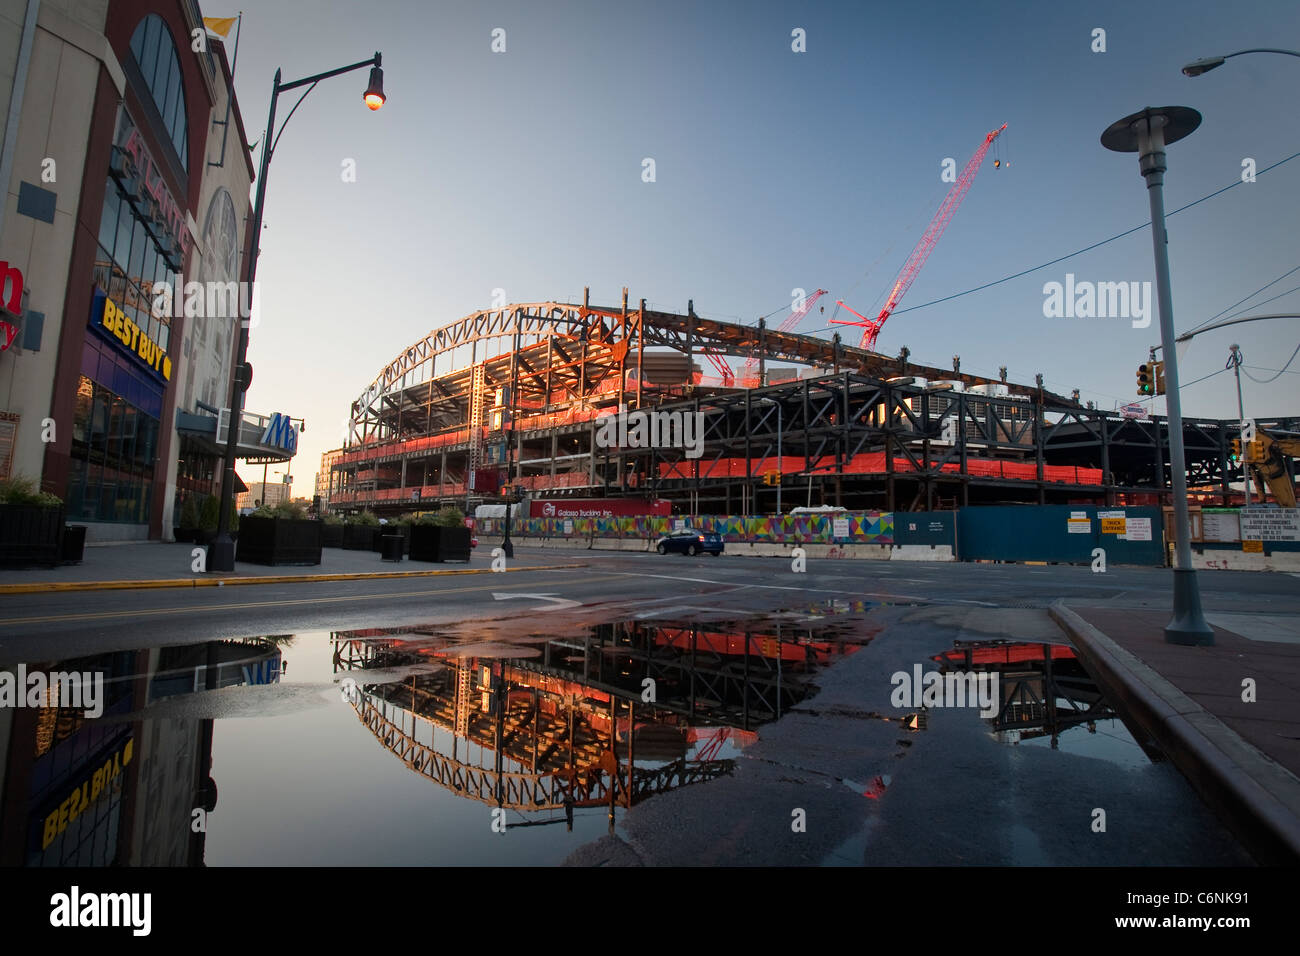 Sun rises on Barclays Center unded construction in Brooklyn, New York, Monday August 1, 2011. Stock Photo